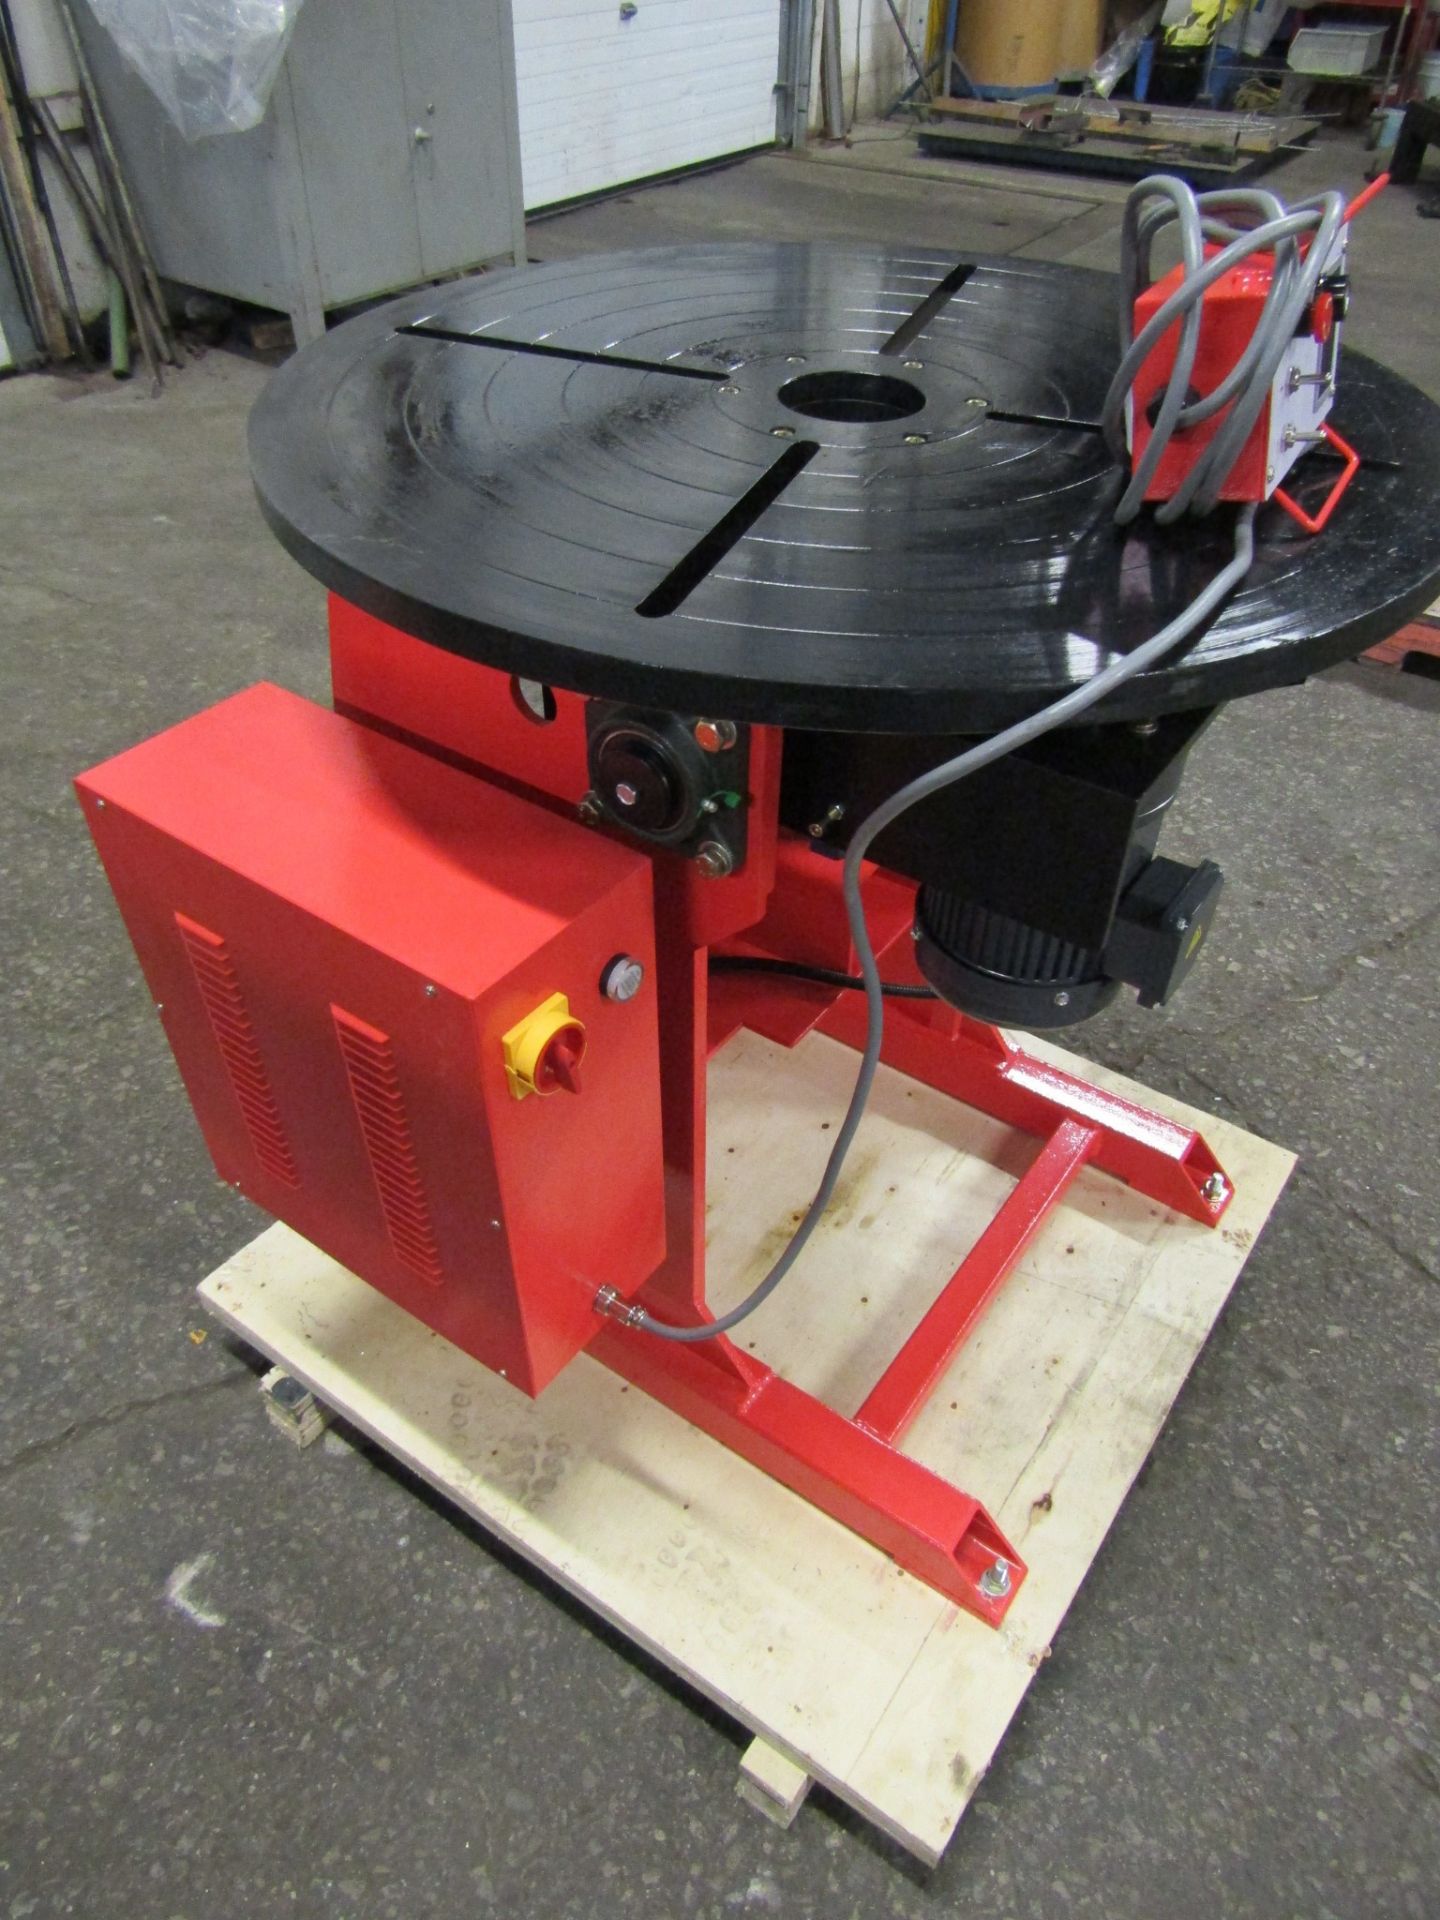 ***** Verner model VD-1500 WELDING POSITIONER 1500lbs capacity - tilt and rotate with variable speed - Image 2 of 2